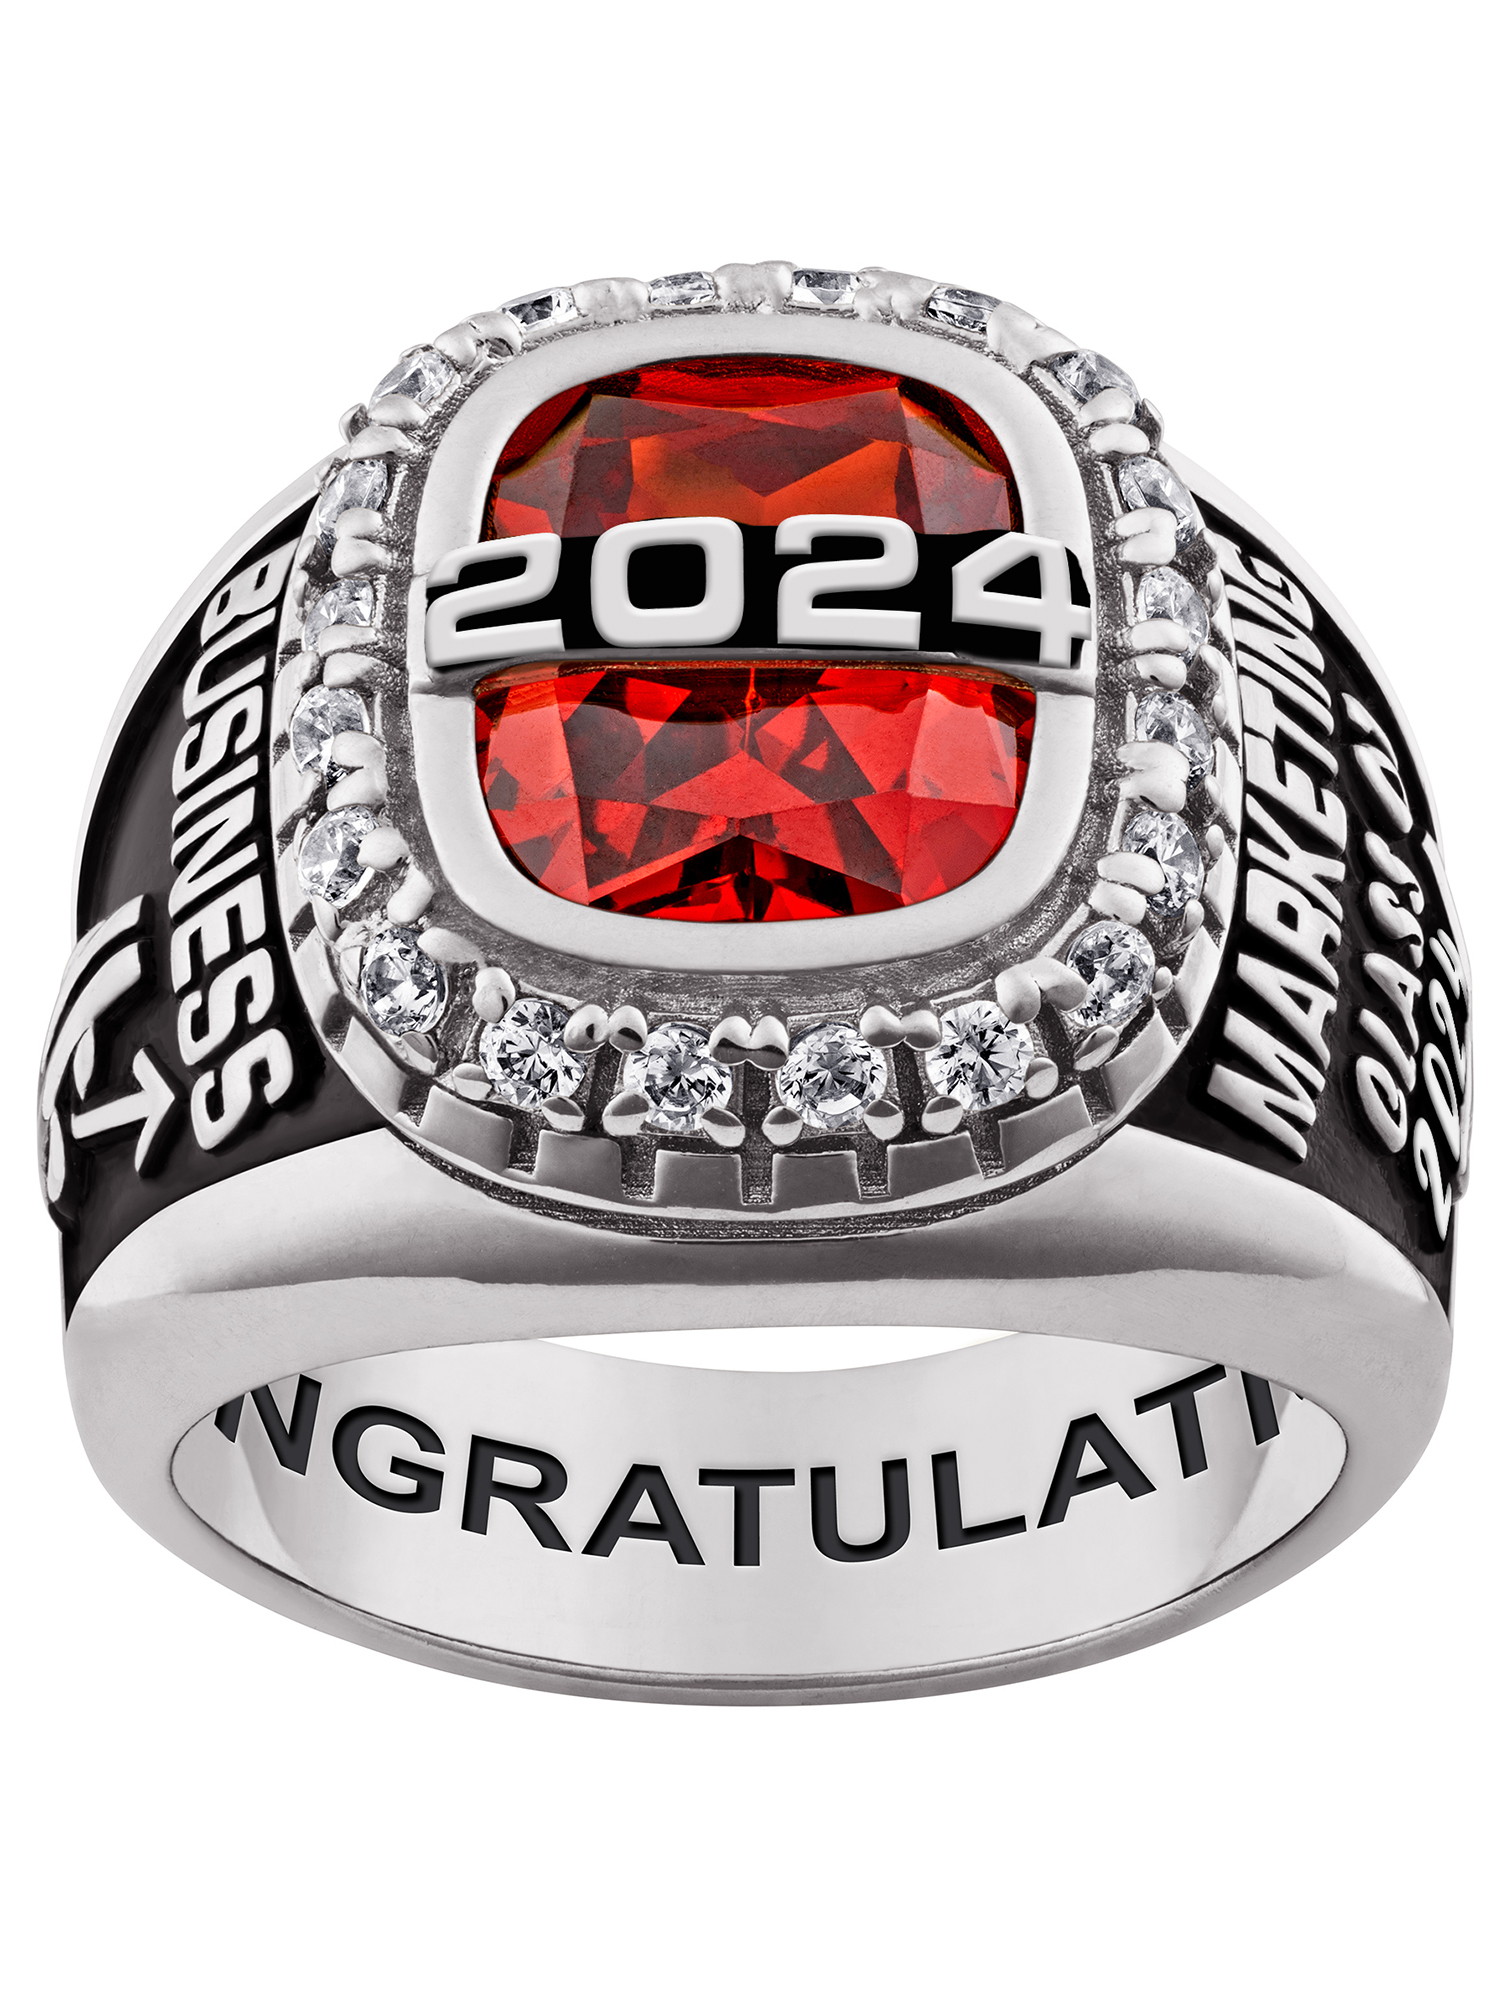 Order Now for Graduation, Freestyle Sterling Silver CZ Encrusted Top Class Ring, Personalized, High School or College - image 1 of 8